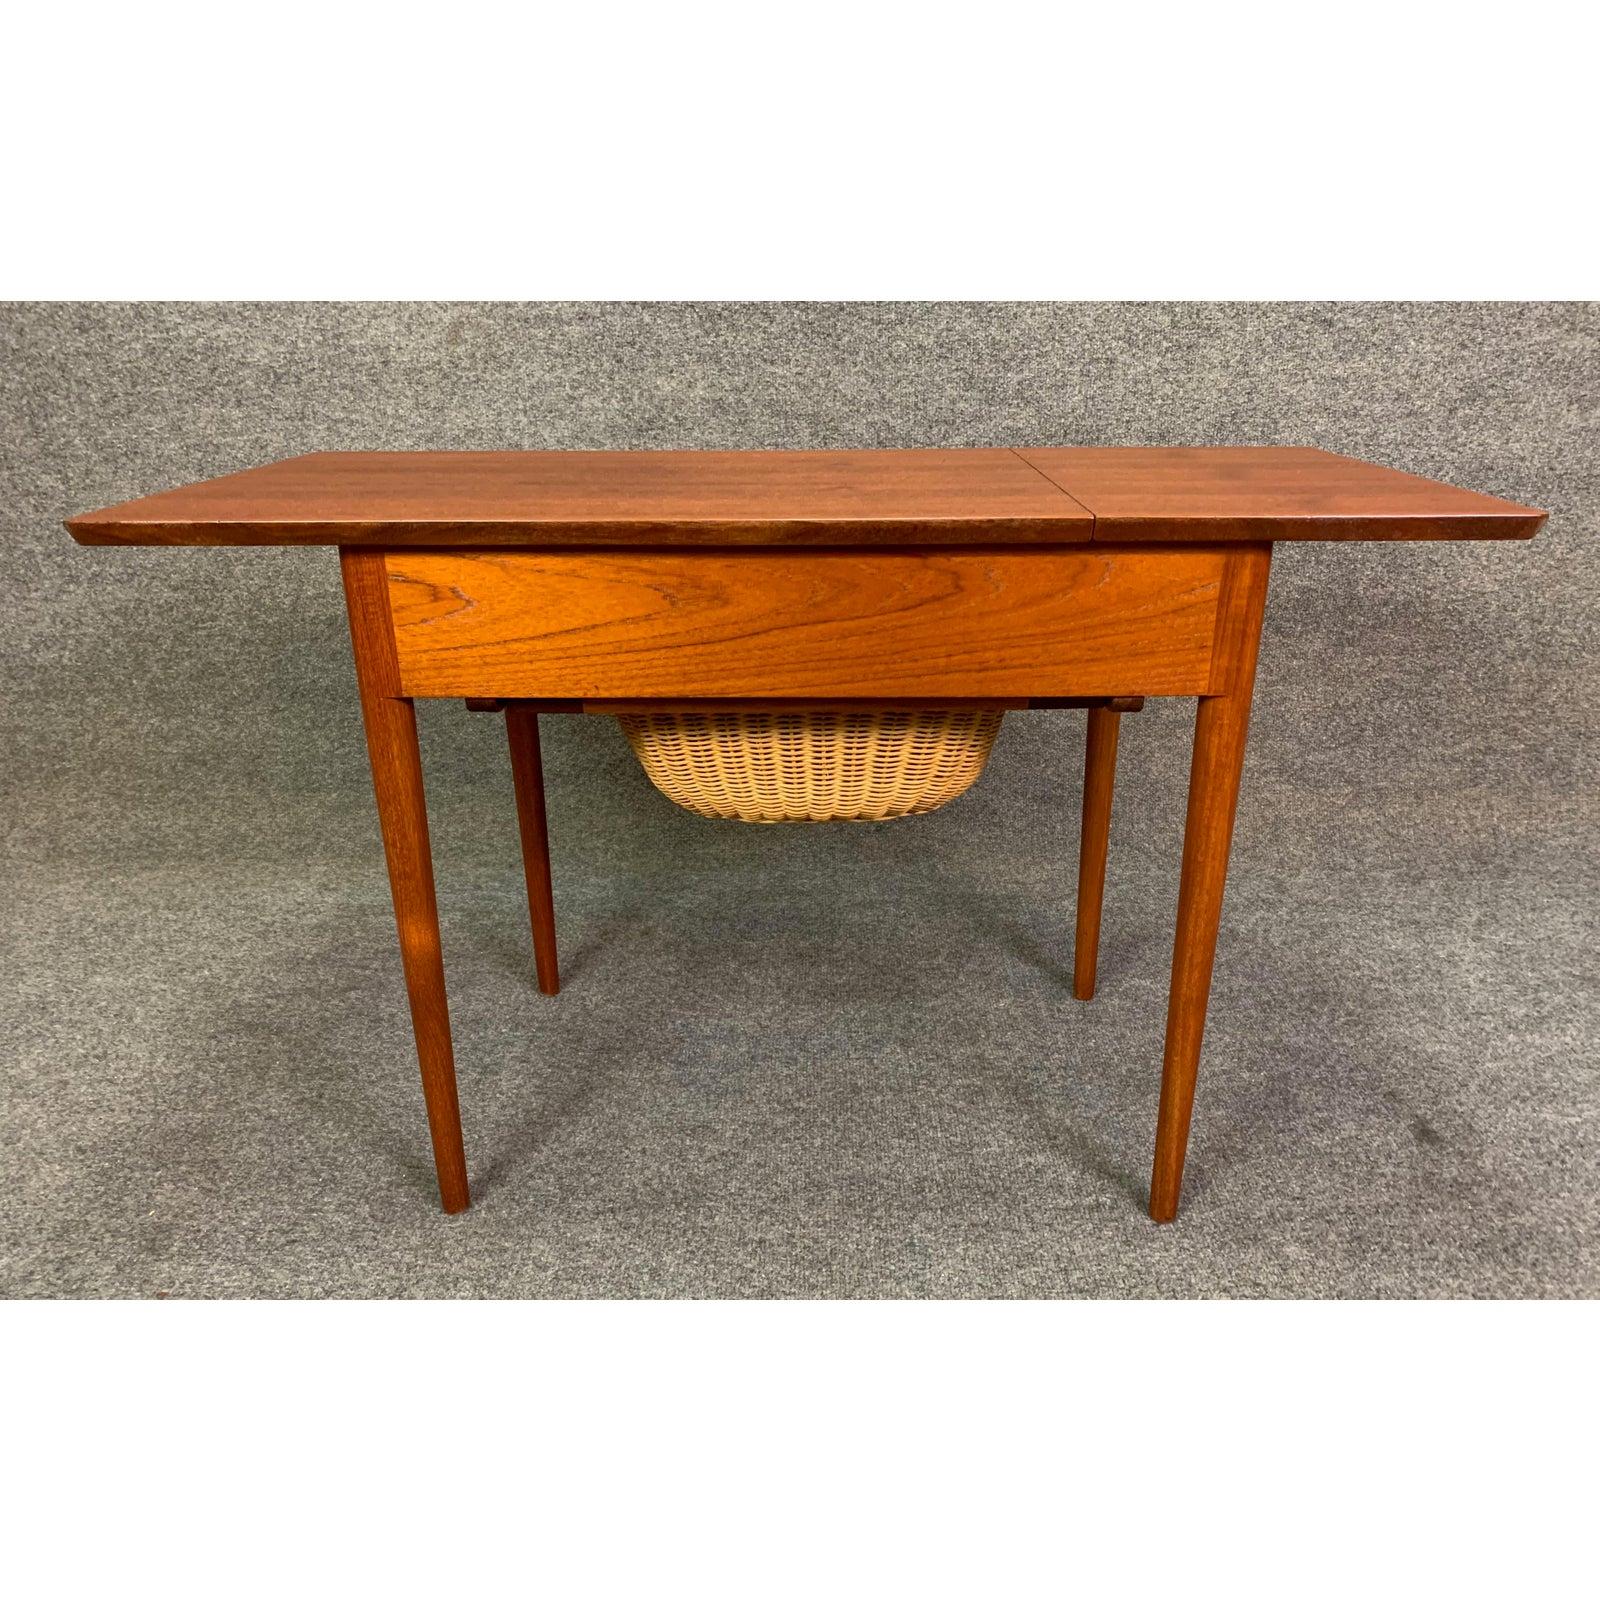 Vintage Danish Mid-Century Modern Teak Sewing Drop Leaf End Table In Good Condition For Sale In San Marcos, CA